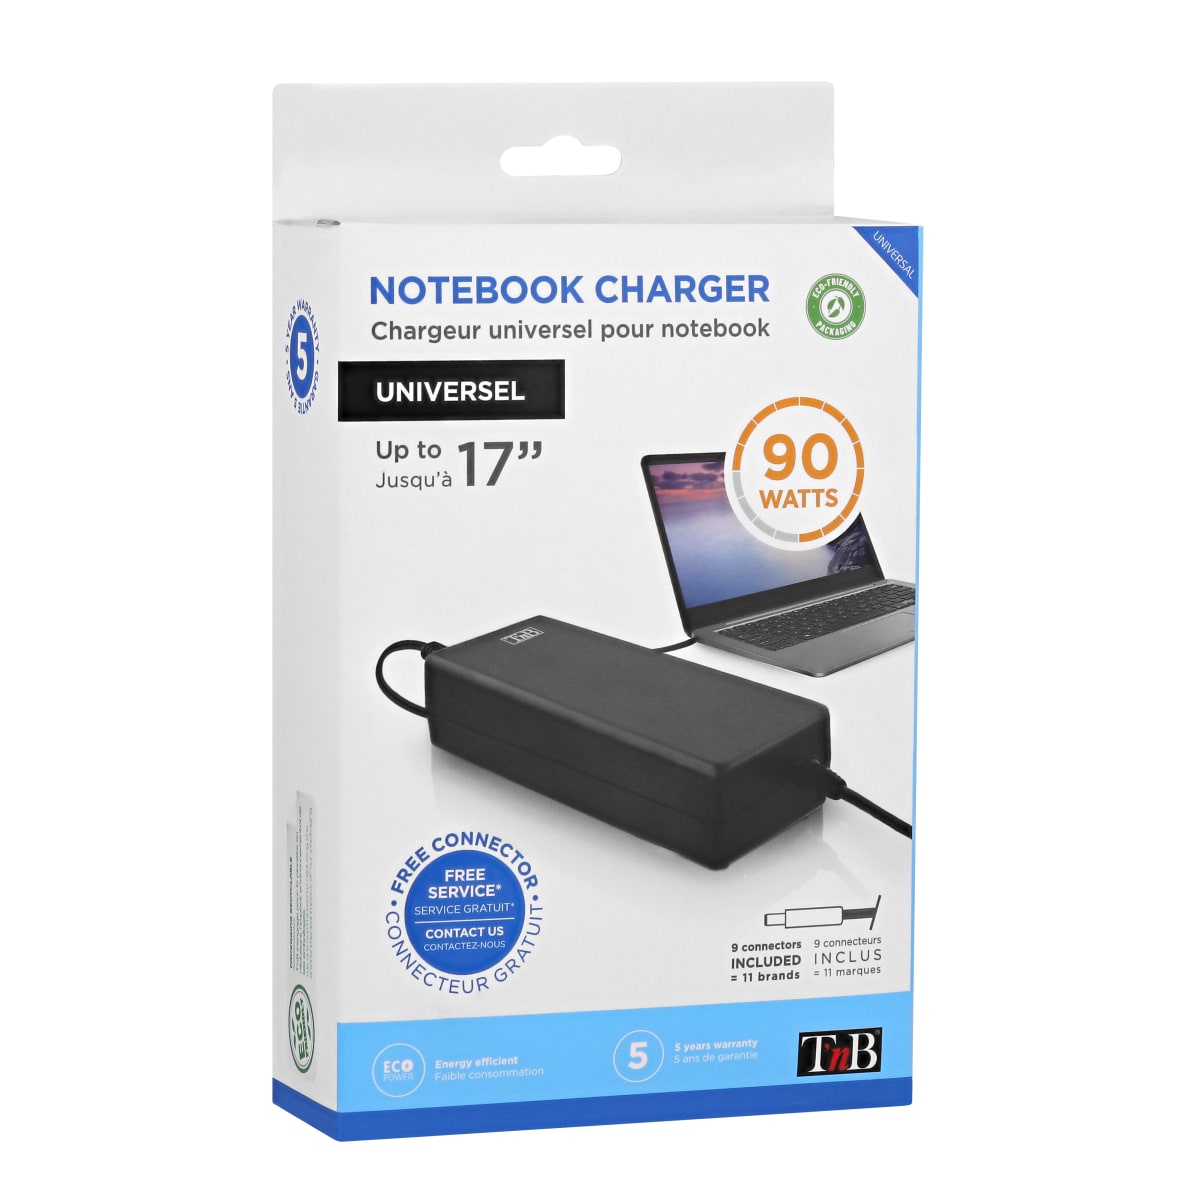 Chargeur universel 90W pour notebook - T'nB